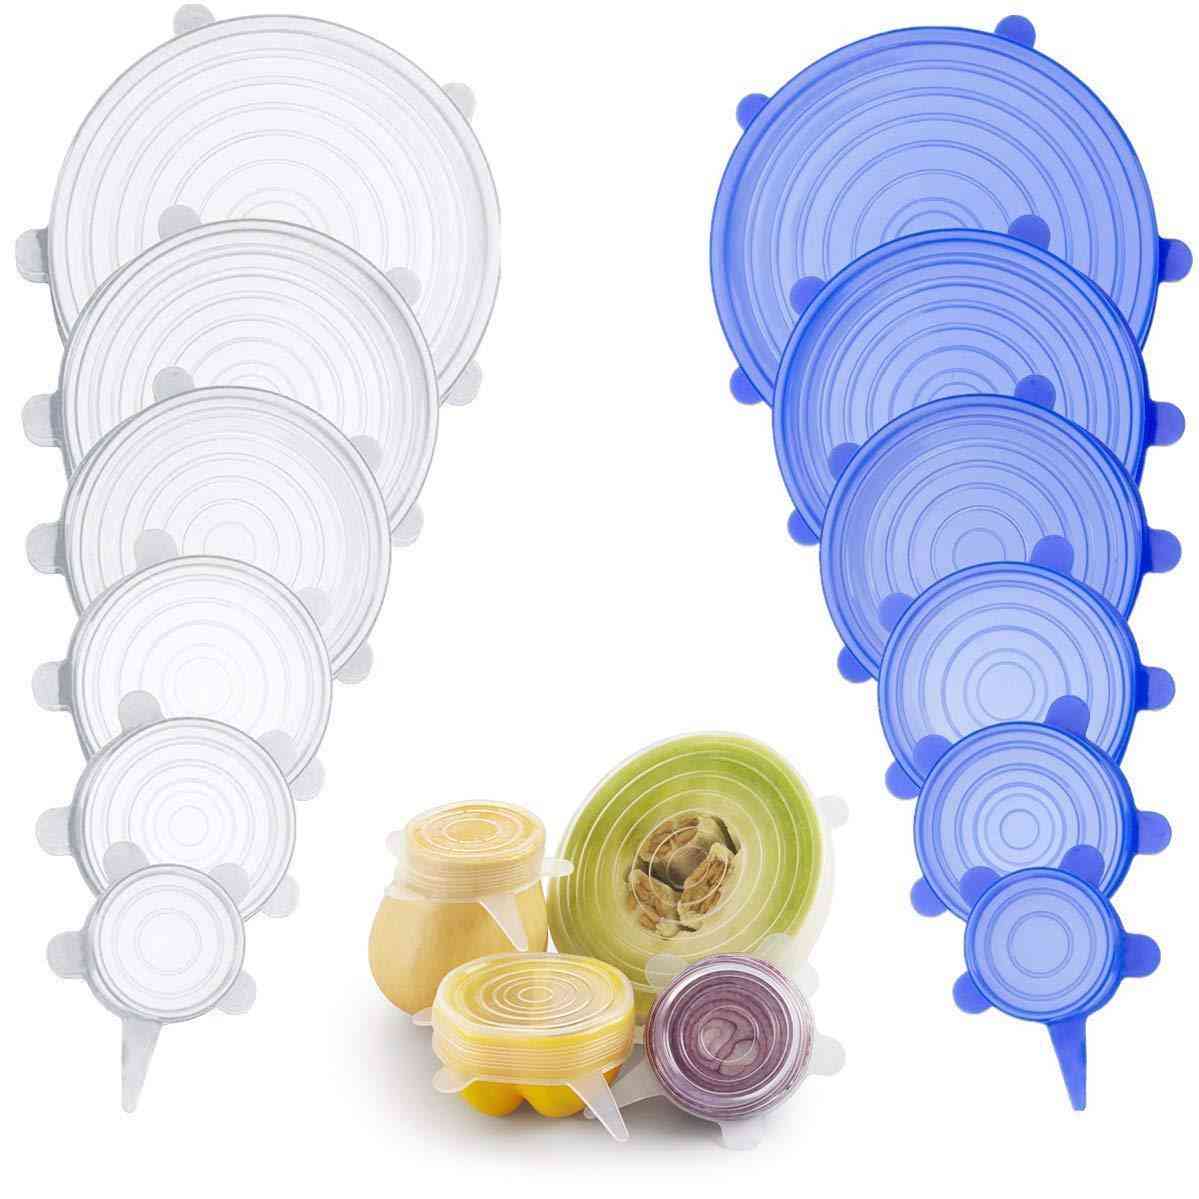 Silicone Stretch Lids Universal Silicone Food Wrap Bowl Pot Lid Silicone Cover Pan Cooking